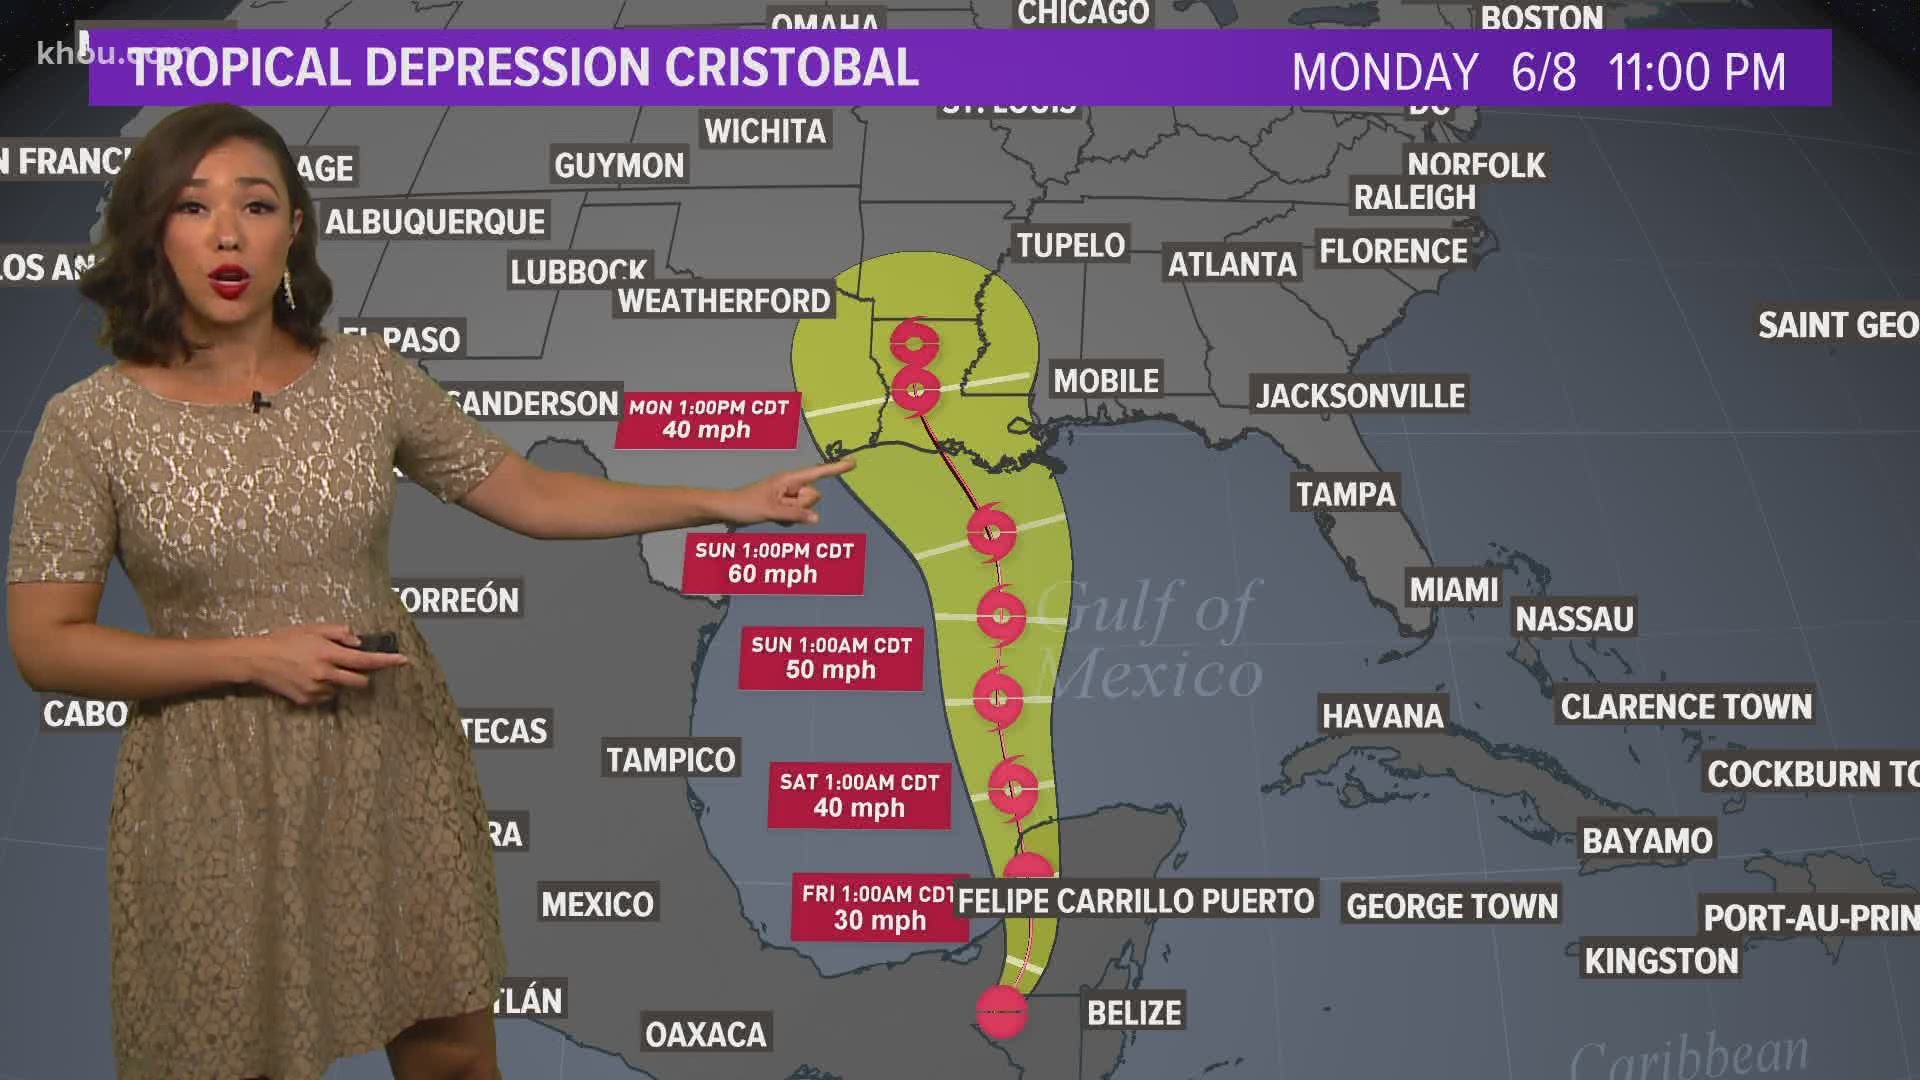 Tracking the latest on Tropical Depression Cristobal